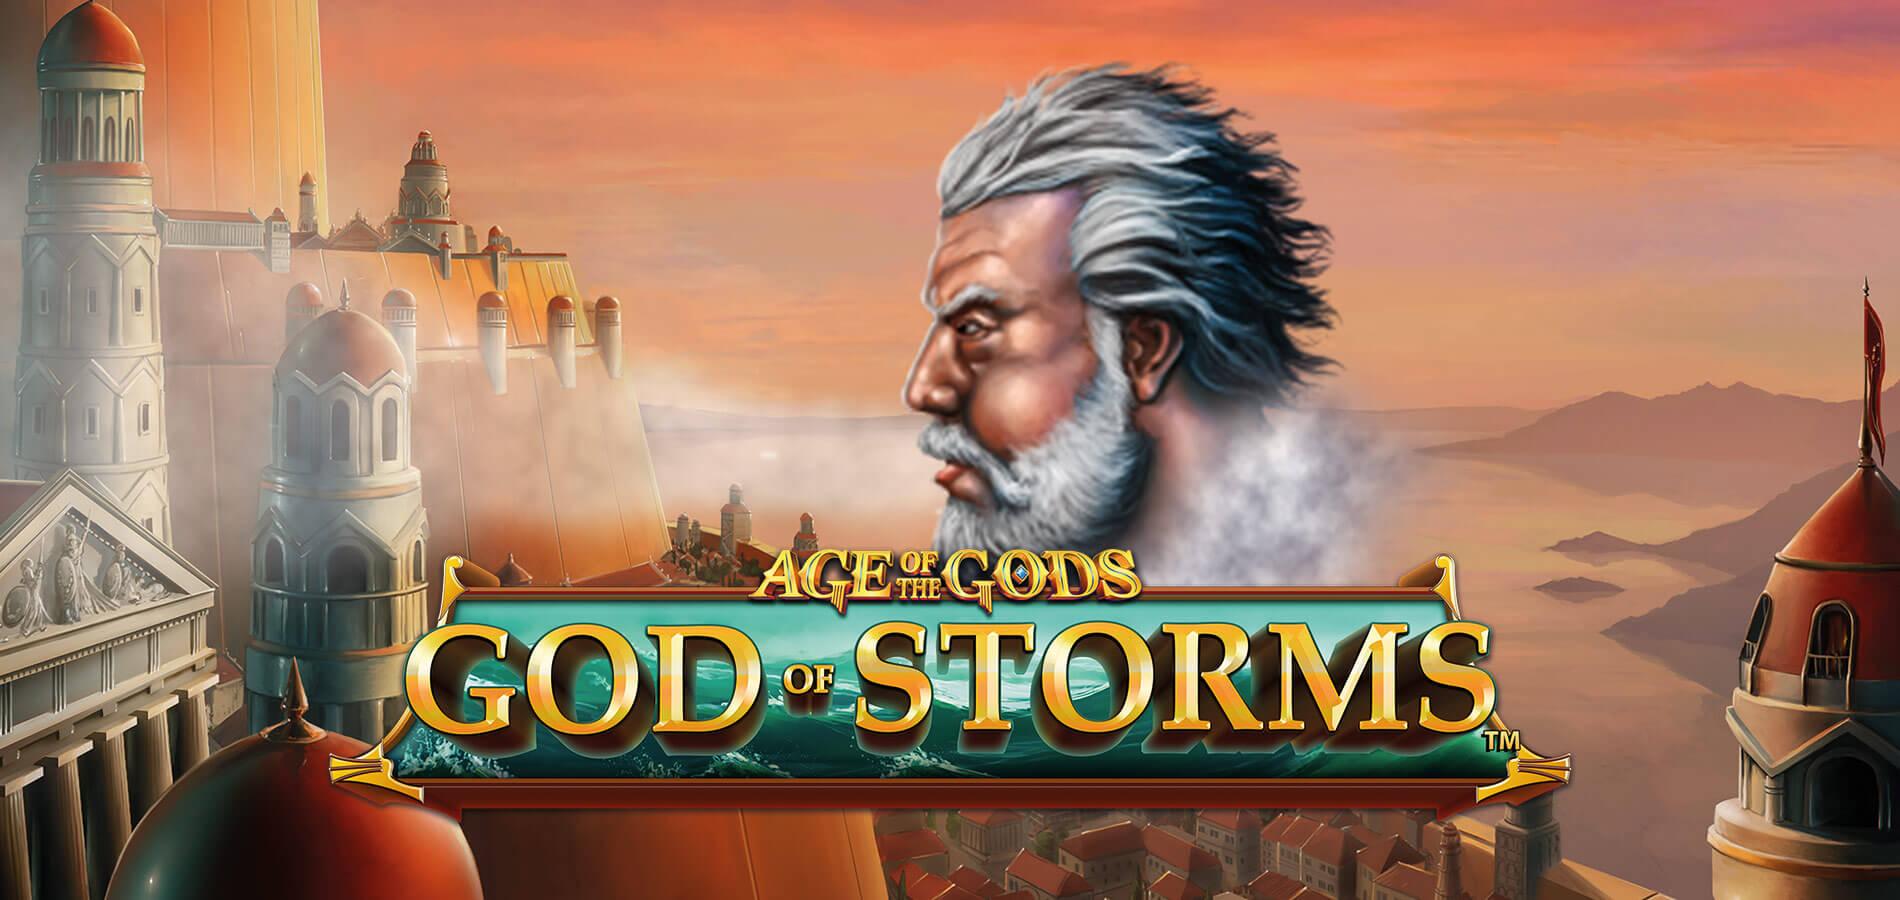 God of Storms slot